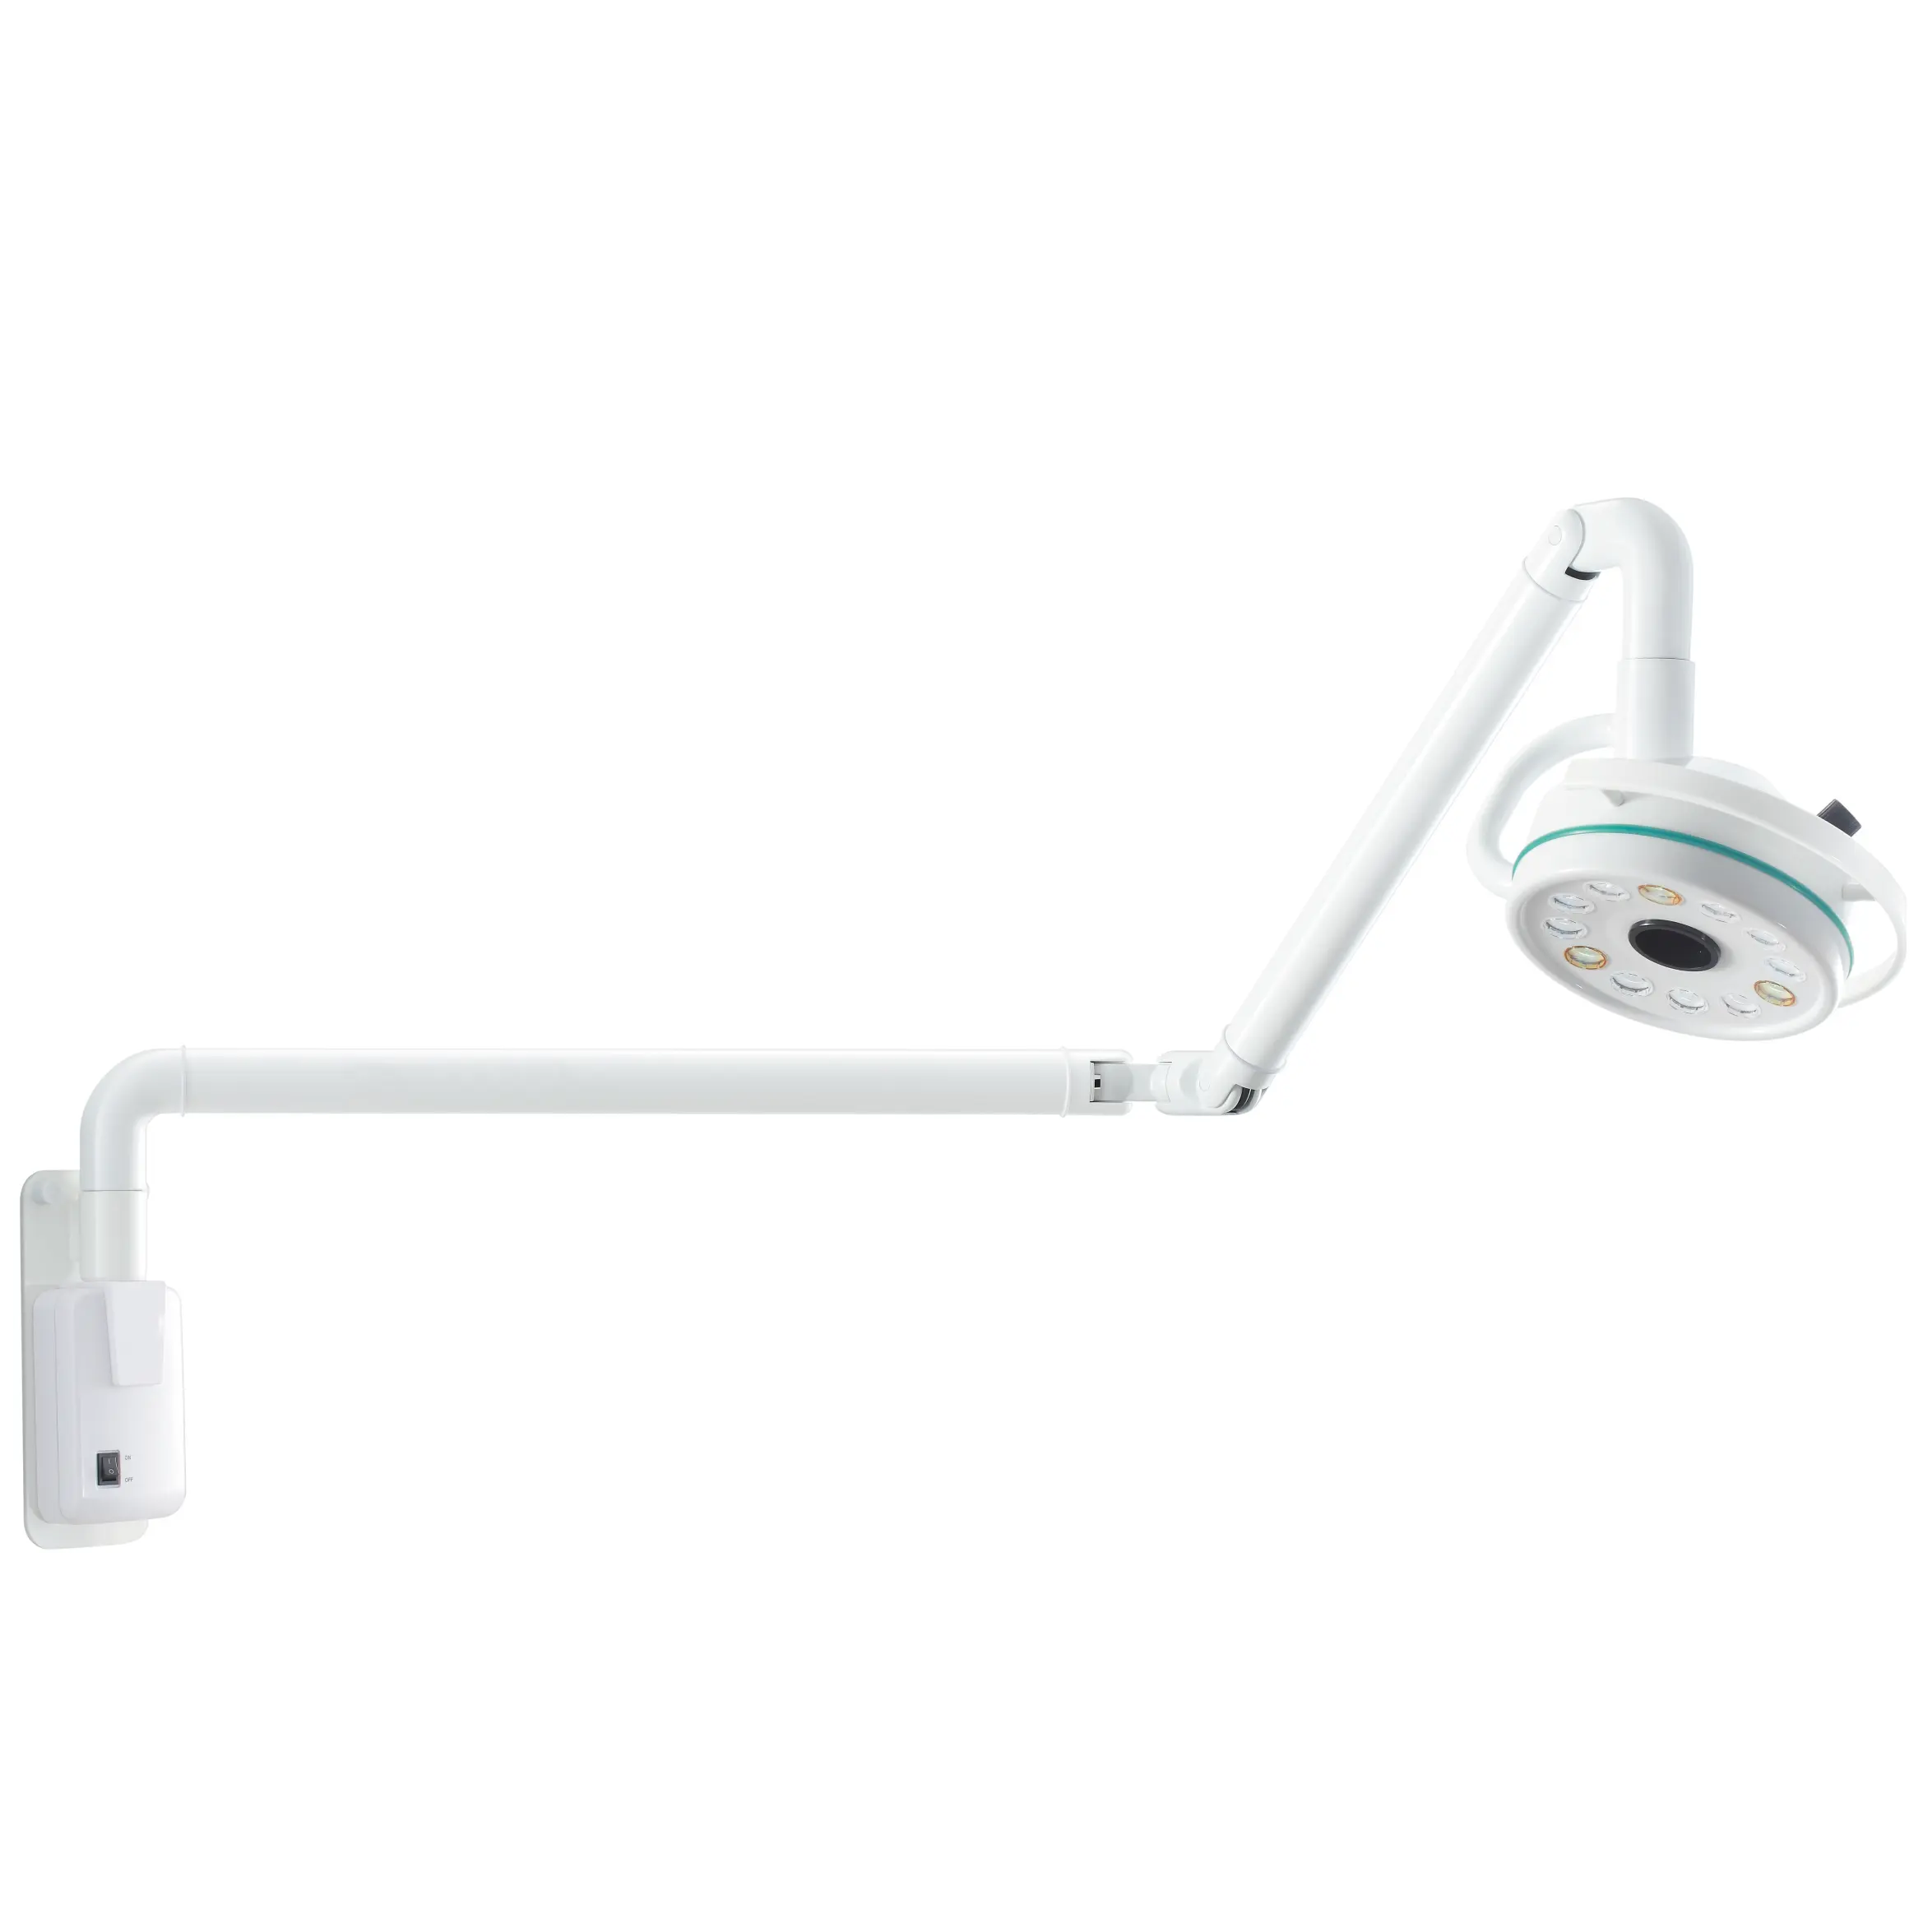 Veterinary Clinic hospital medical equipment led surgical lights prices examination light